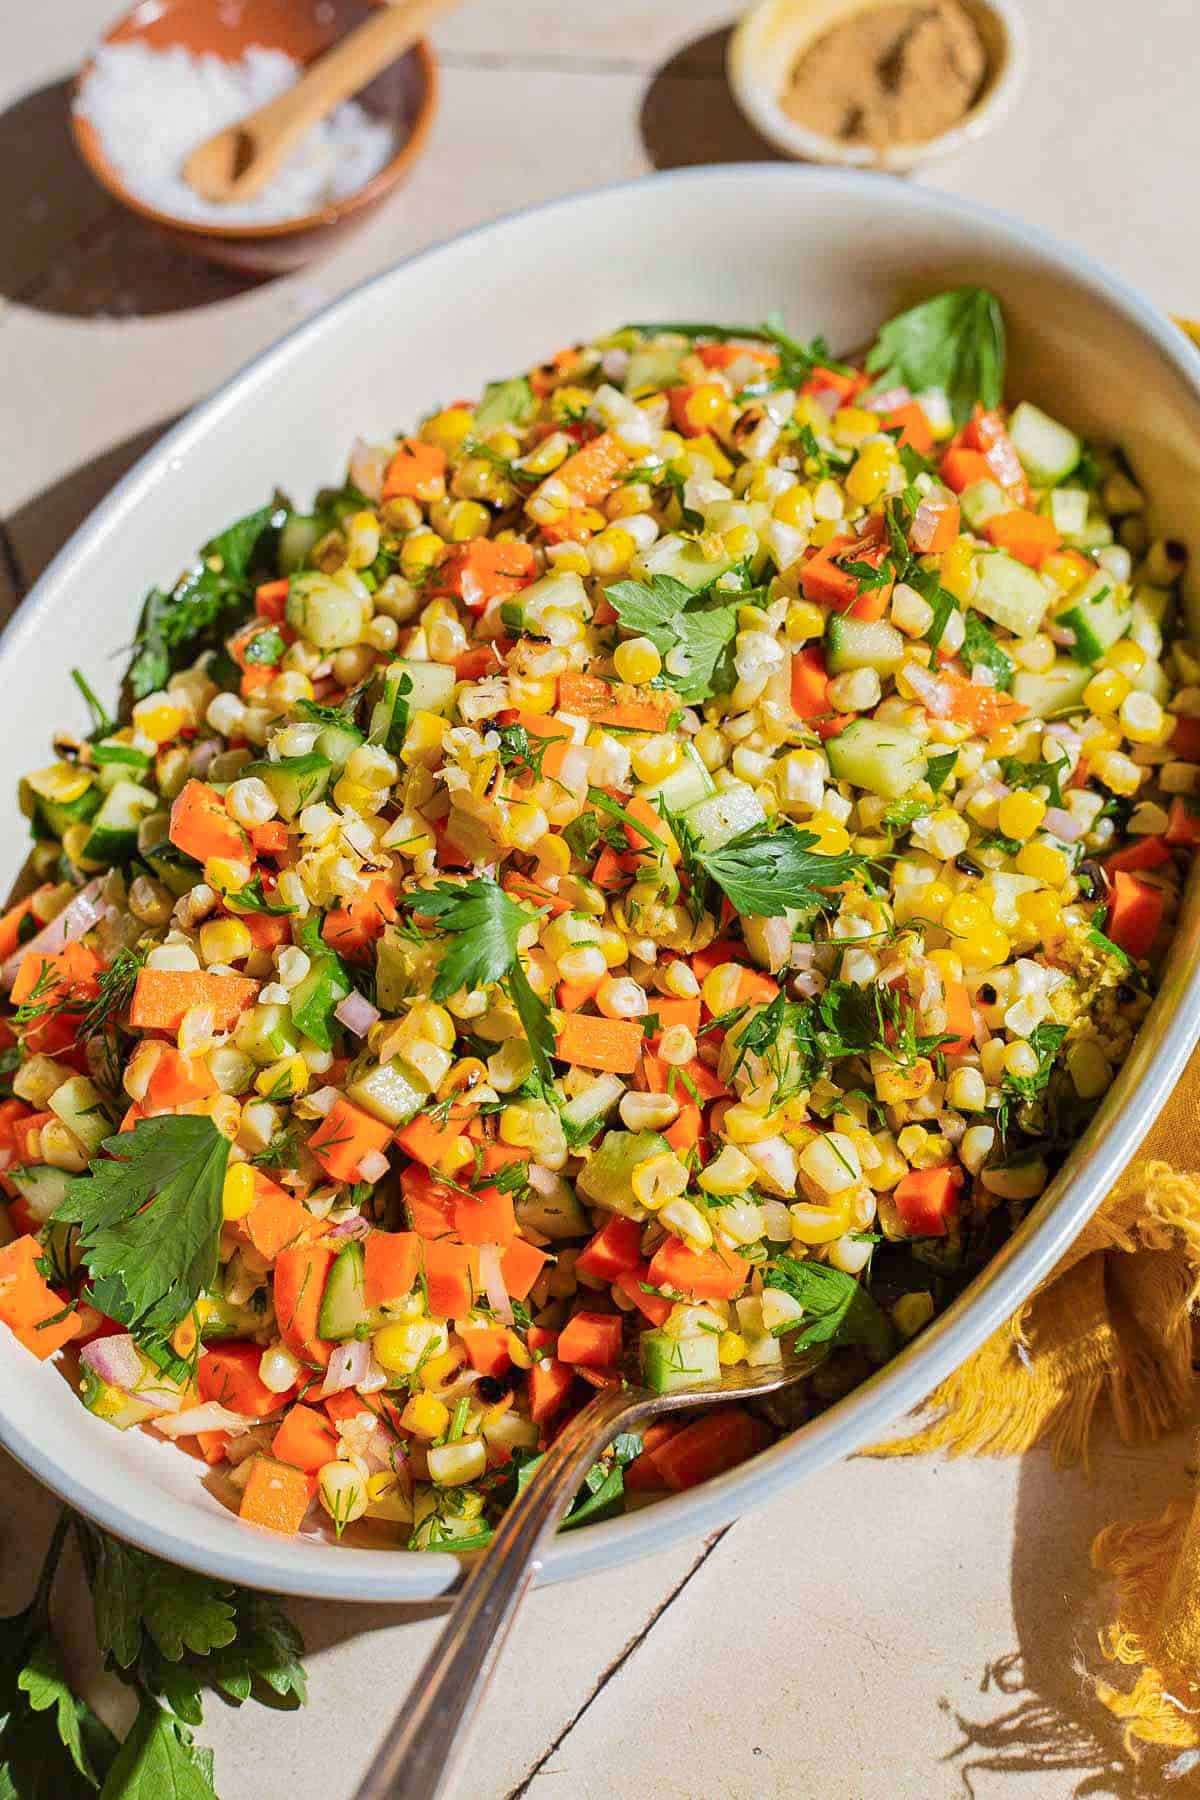 Grilled corn salad in a serving bowl with a spoon. Next to this are small bowls of salt and cumin.